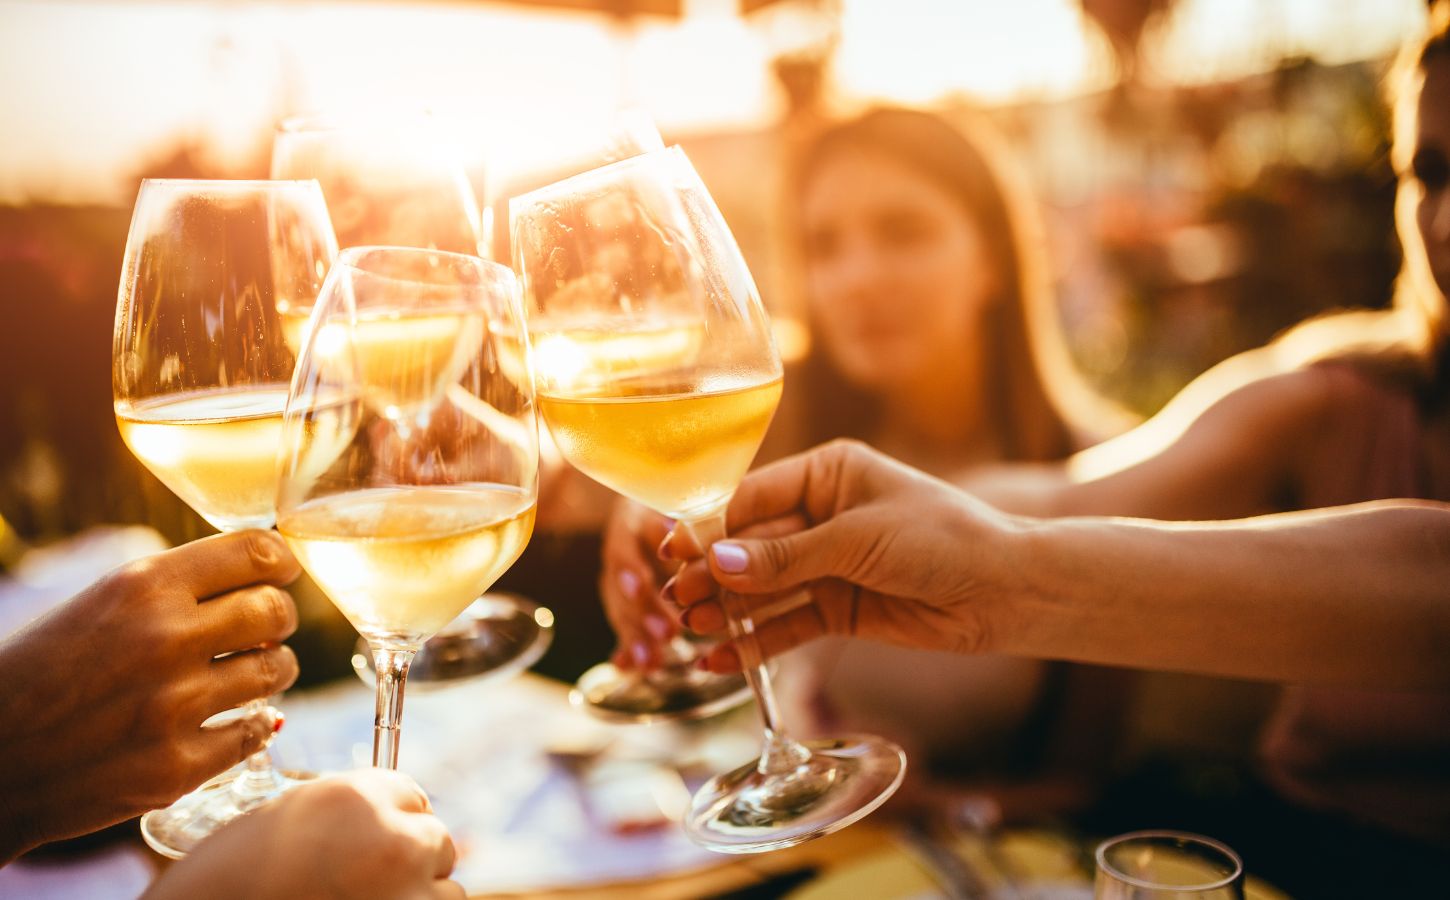 People cheers with glasses of vegan wine outside in the sunlight